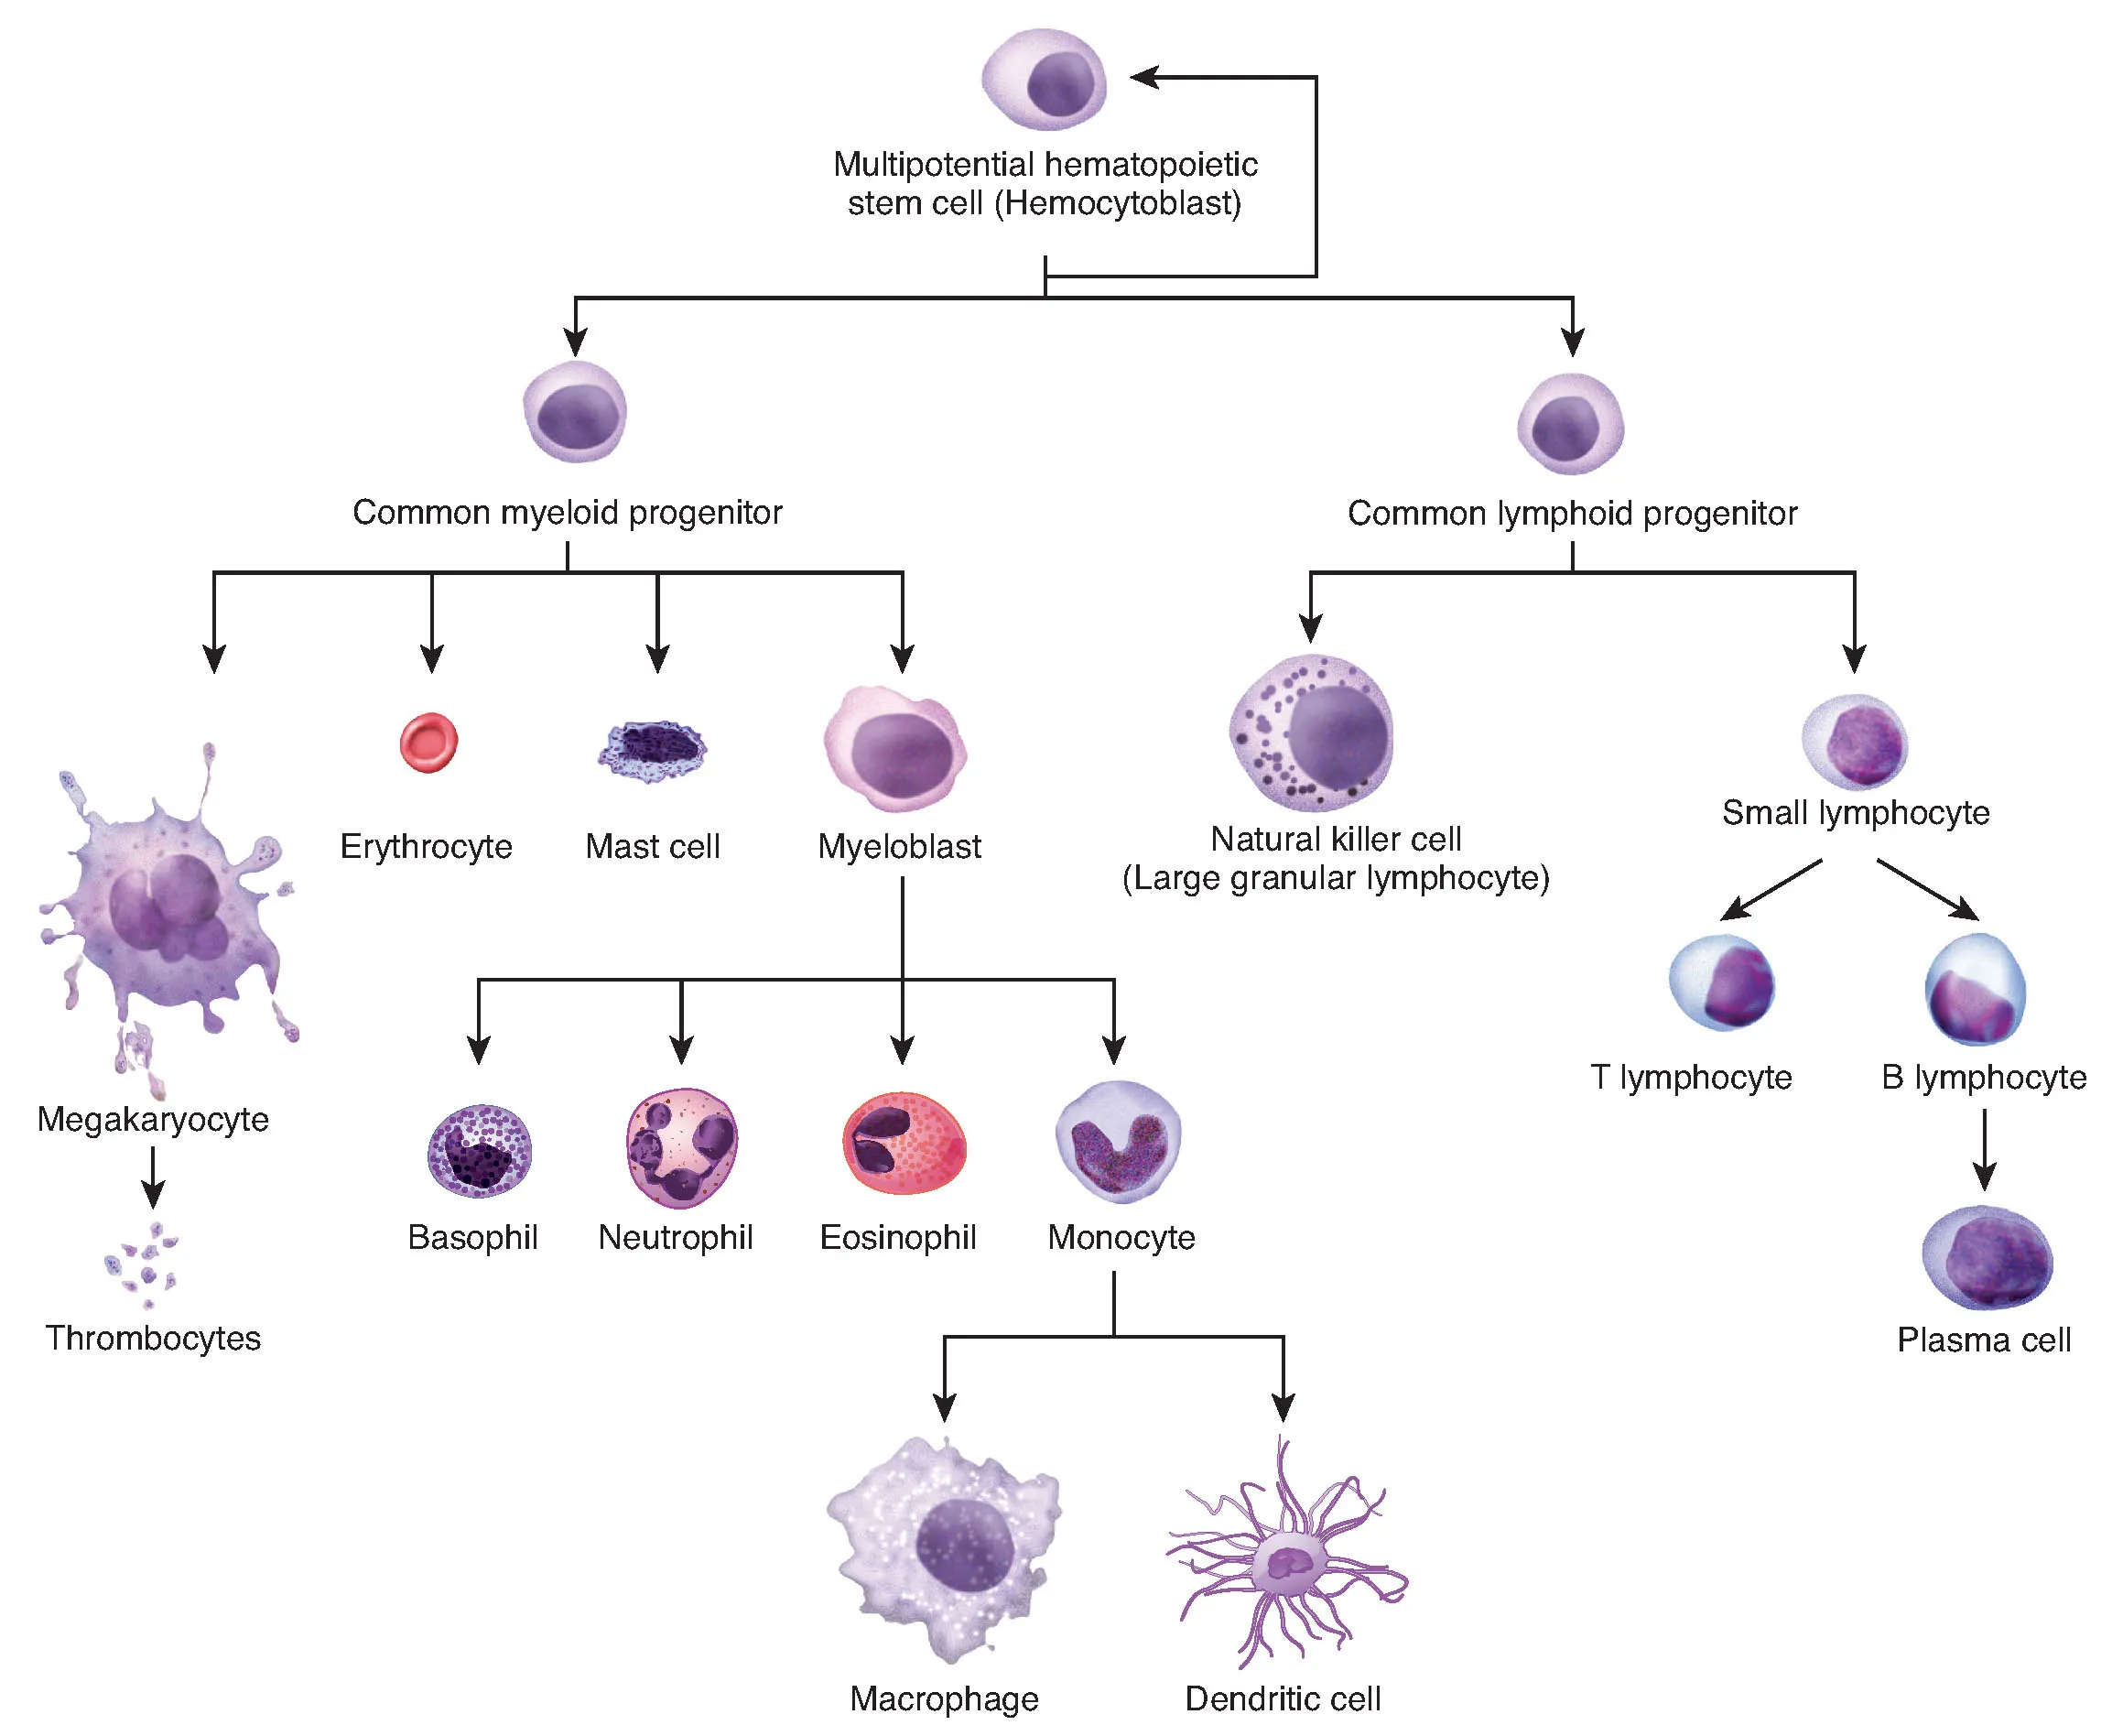 This flowchart shows the differentiation of a hemocytoblast, a stem cell, into the different types of cells found in blood.